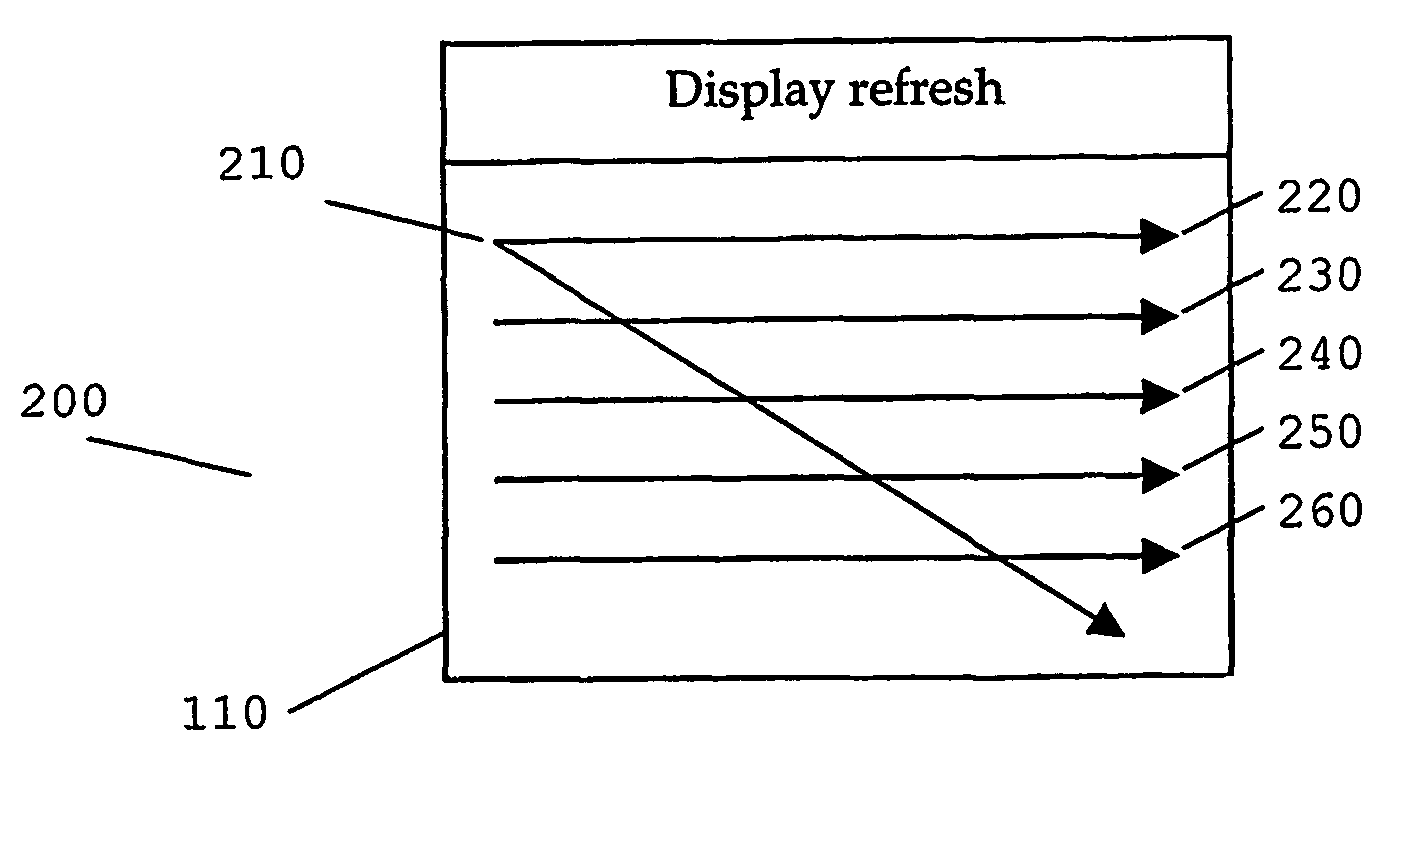 Image refresh in a display